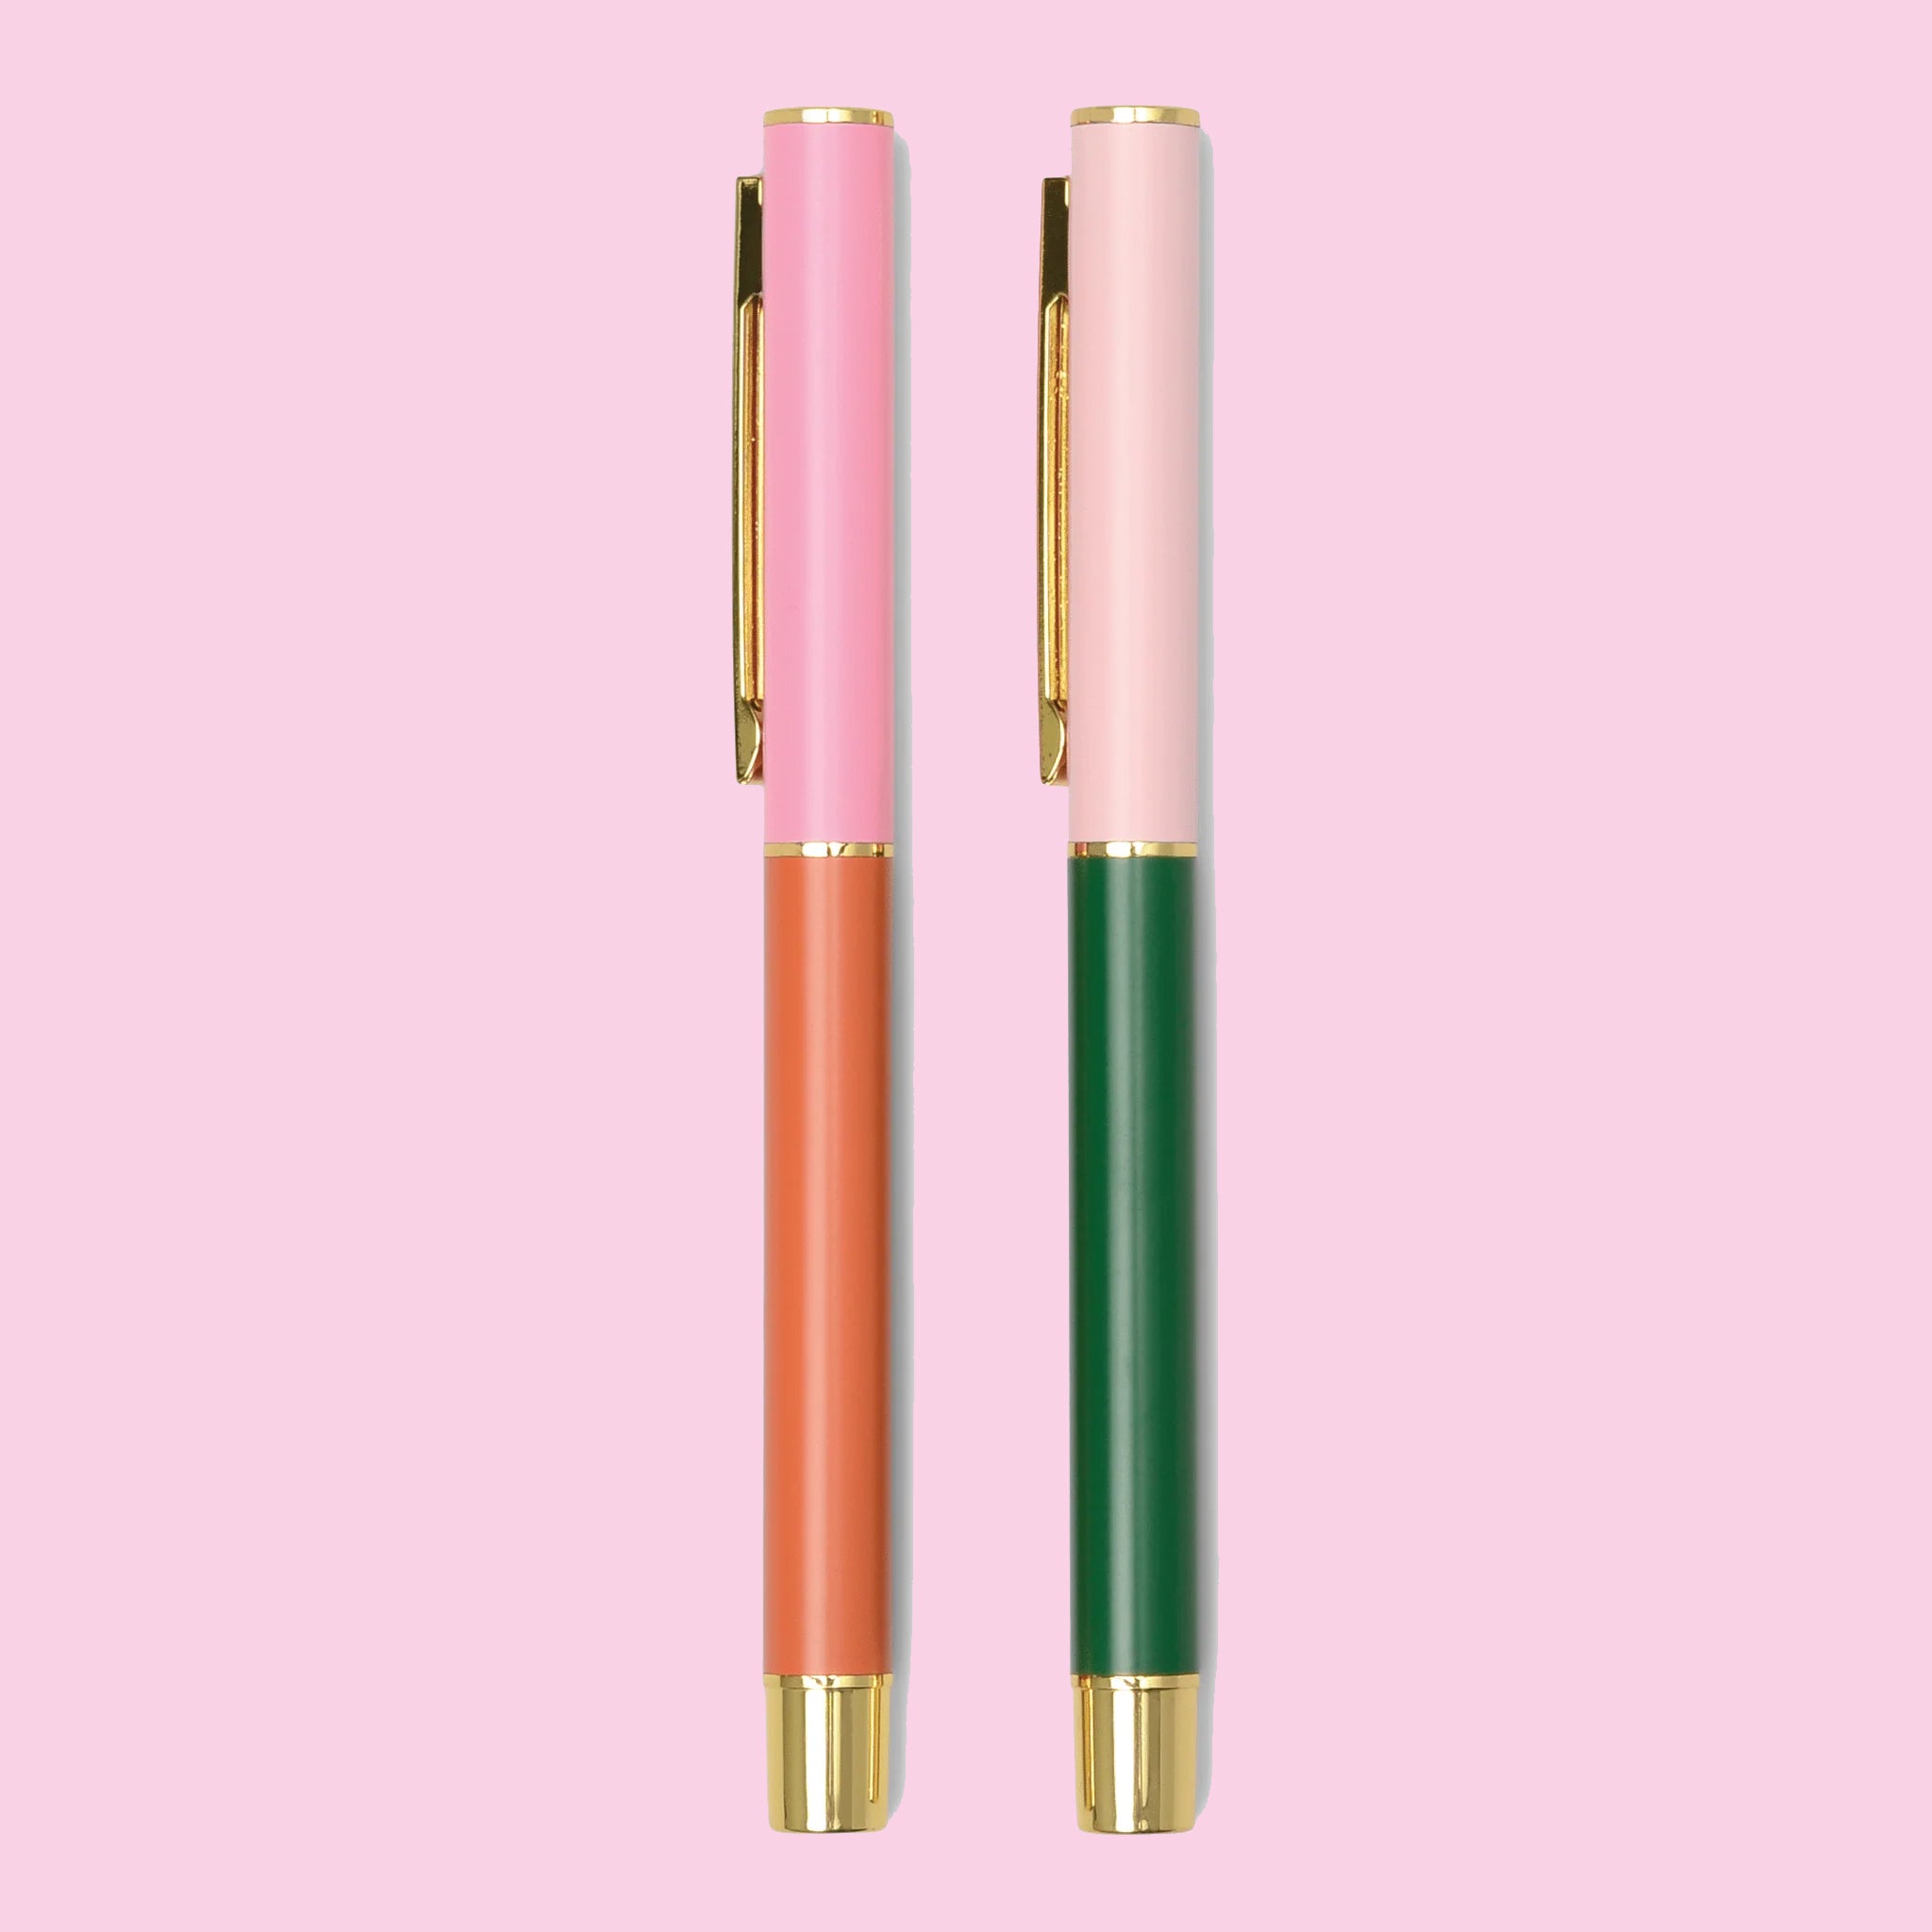 On a pink background is a pair of pens, one orange and pink and the other emerald green and pink. 